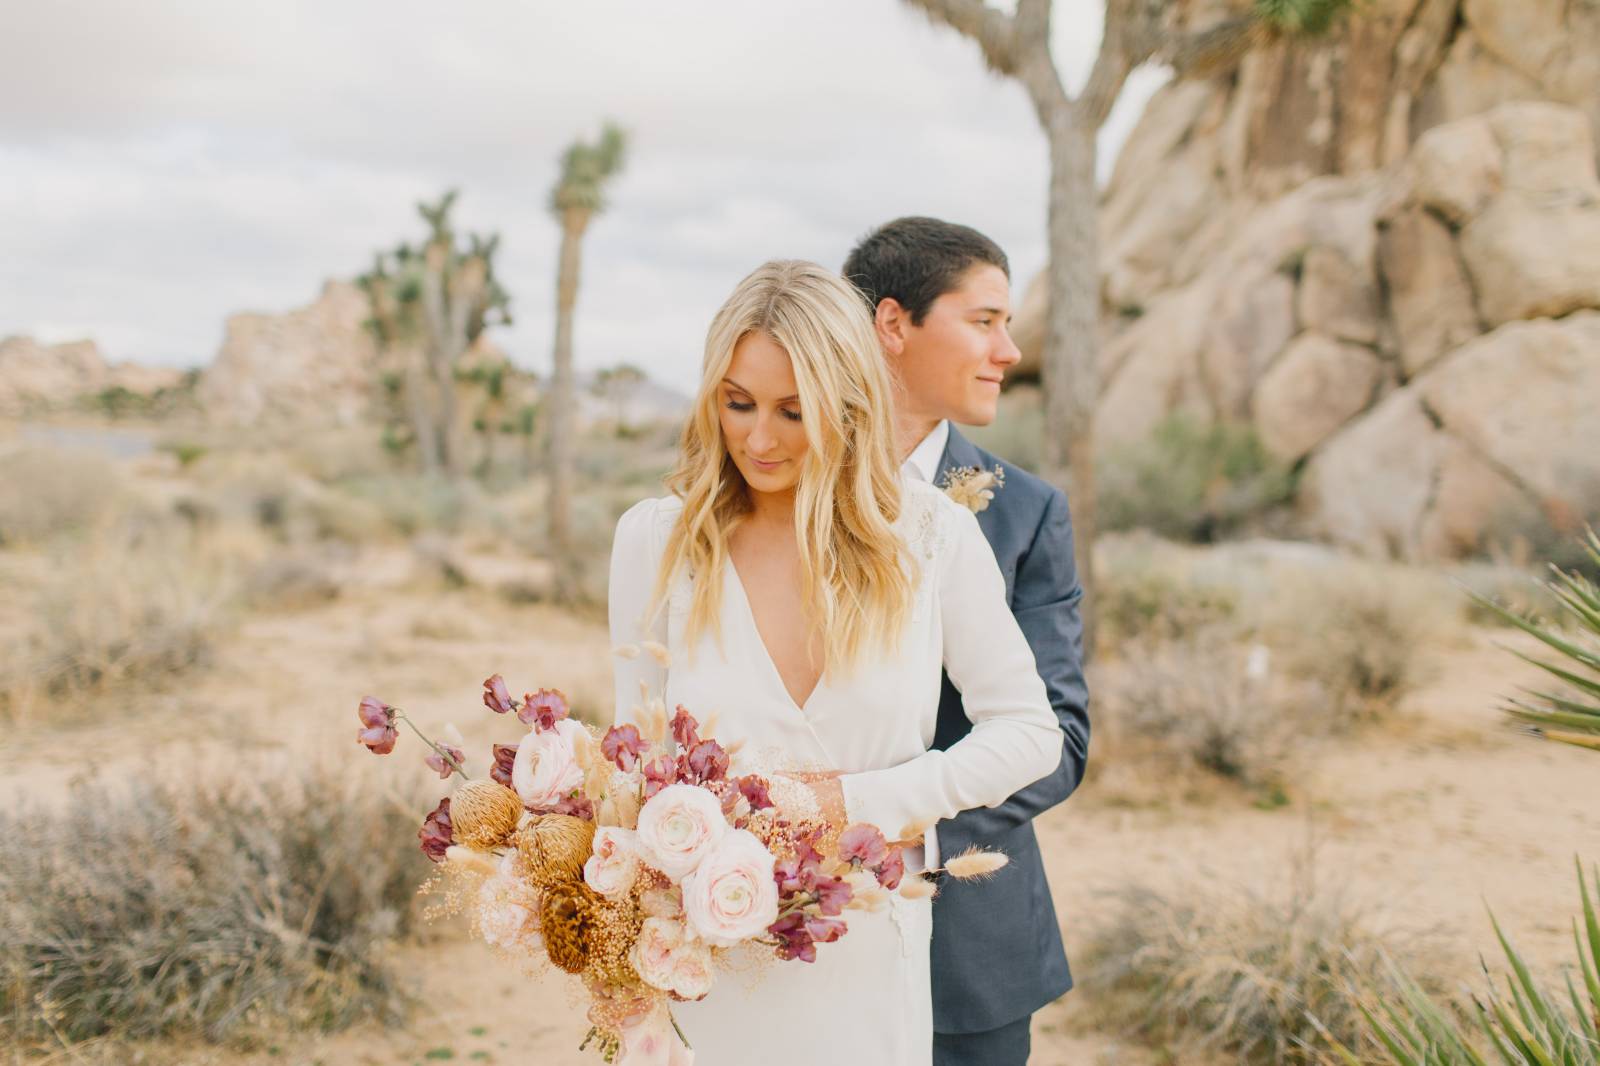 The Couple with the Beautiful Flowers | The Wedding Standard